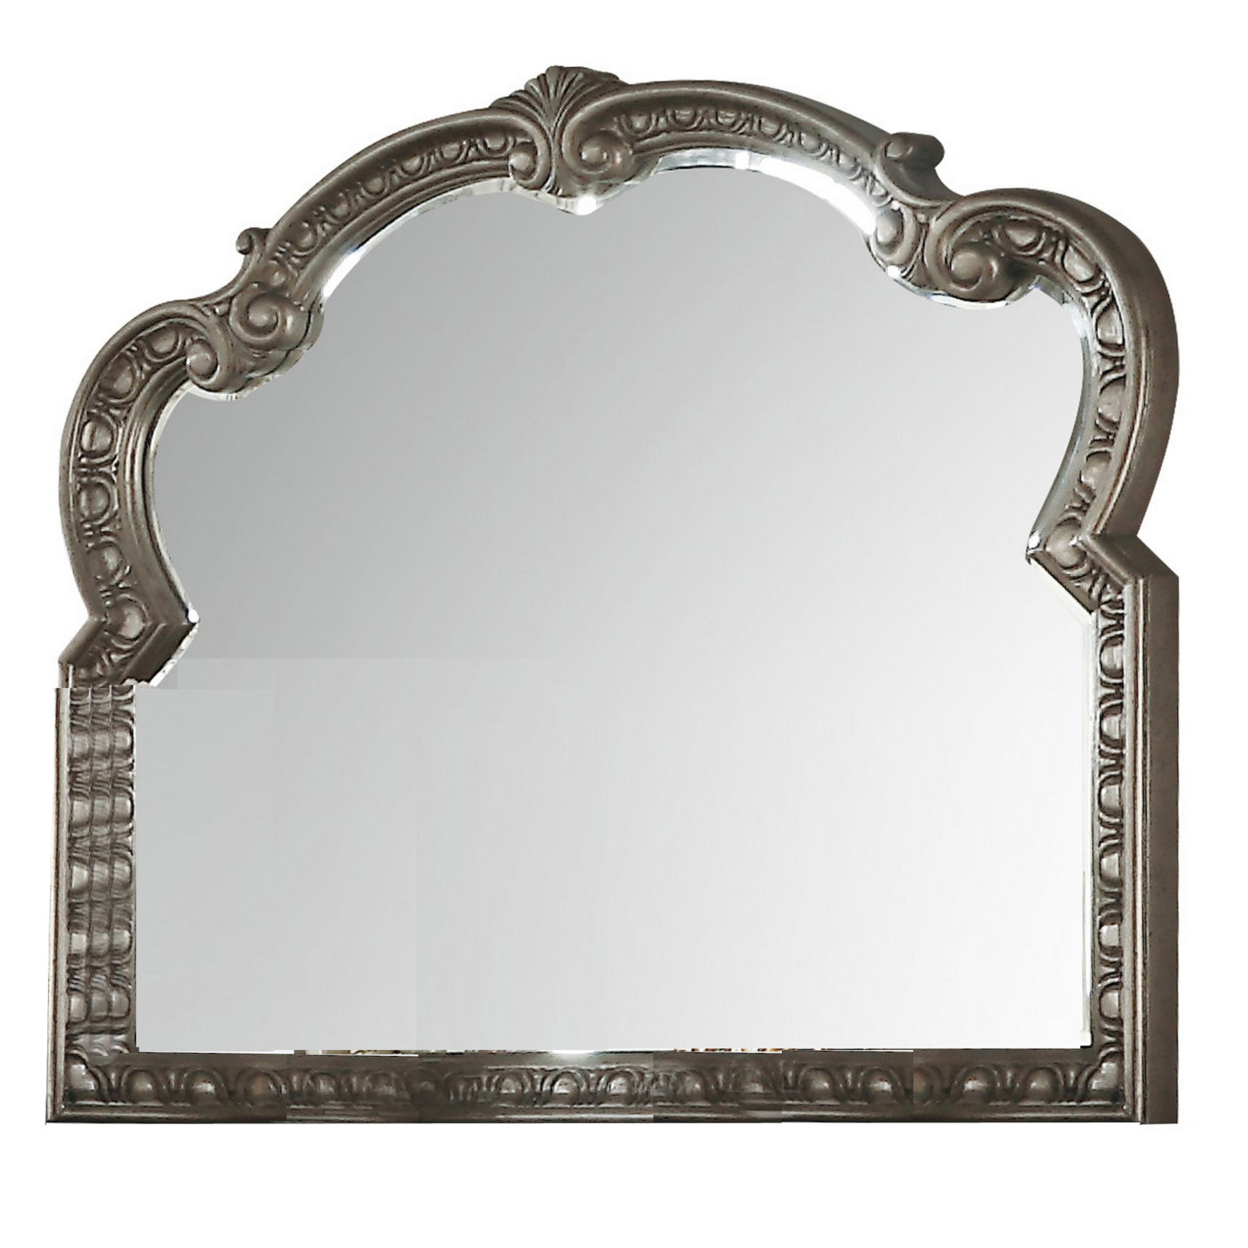 Wooden Carved Wall Mirror With Scrolled Framework. Gold- Saltoro Sherpi